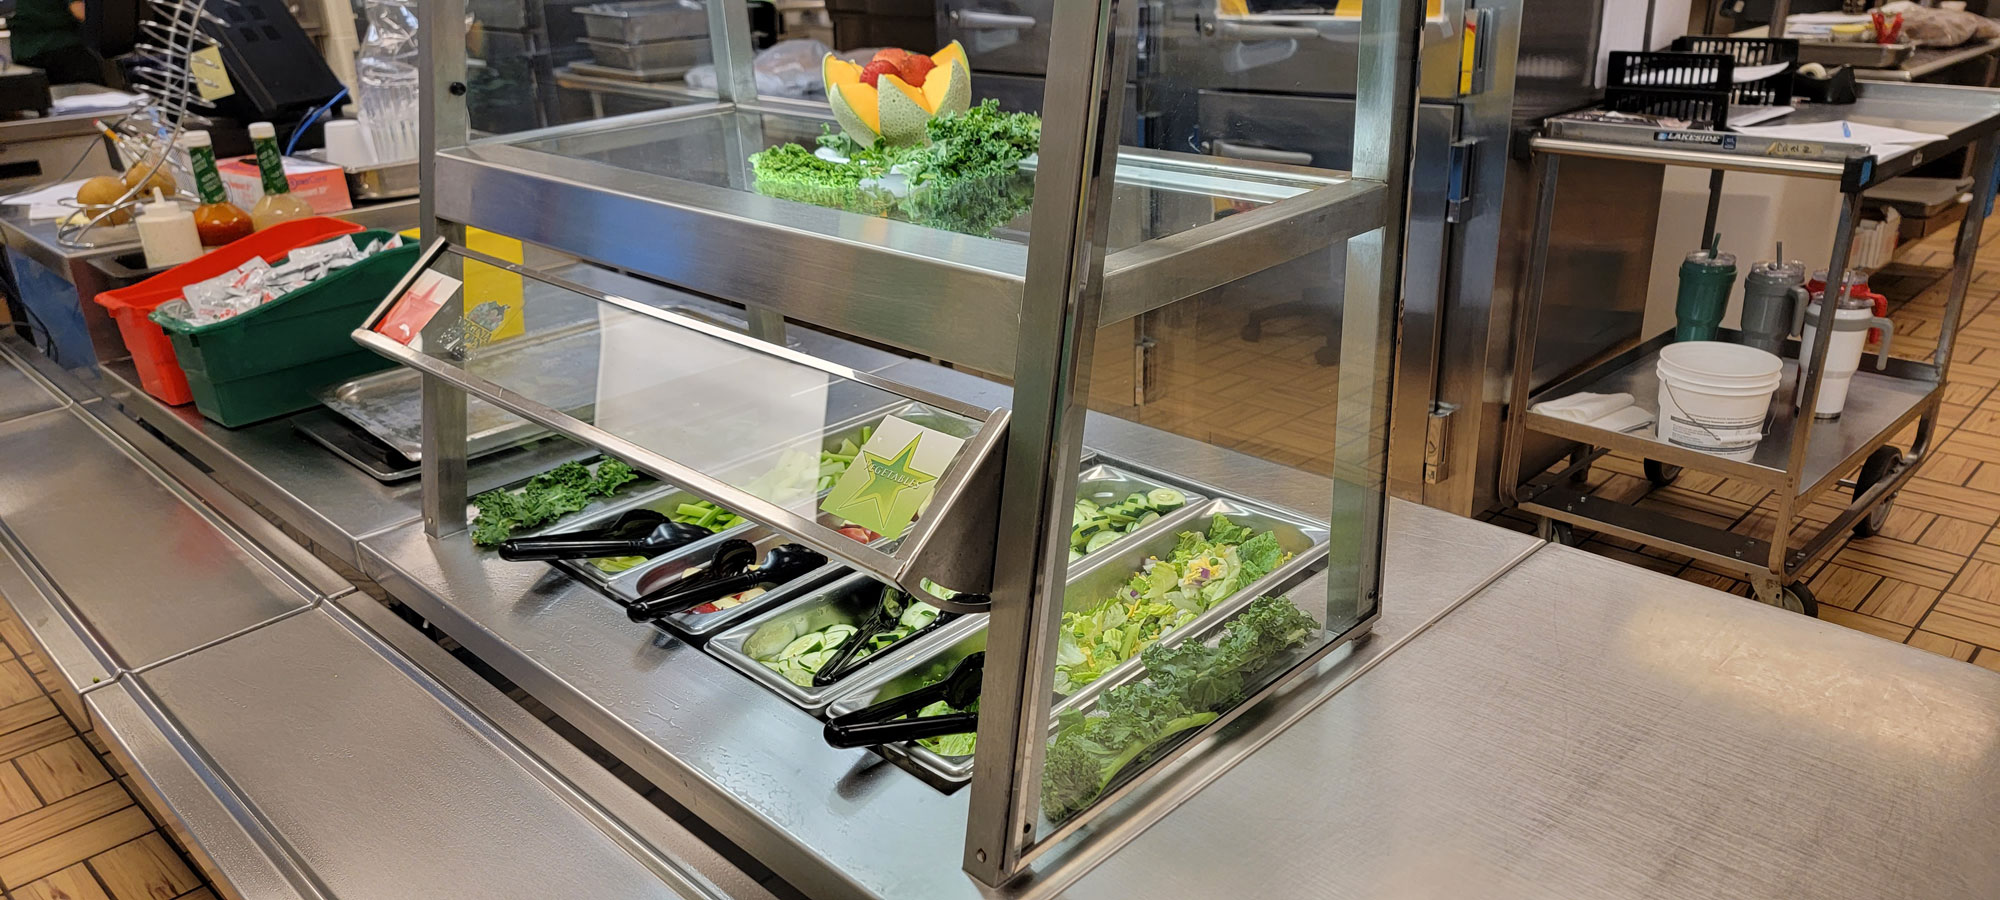 A school cafeteria salad bar features Virginia grown fruits and vegetables